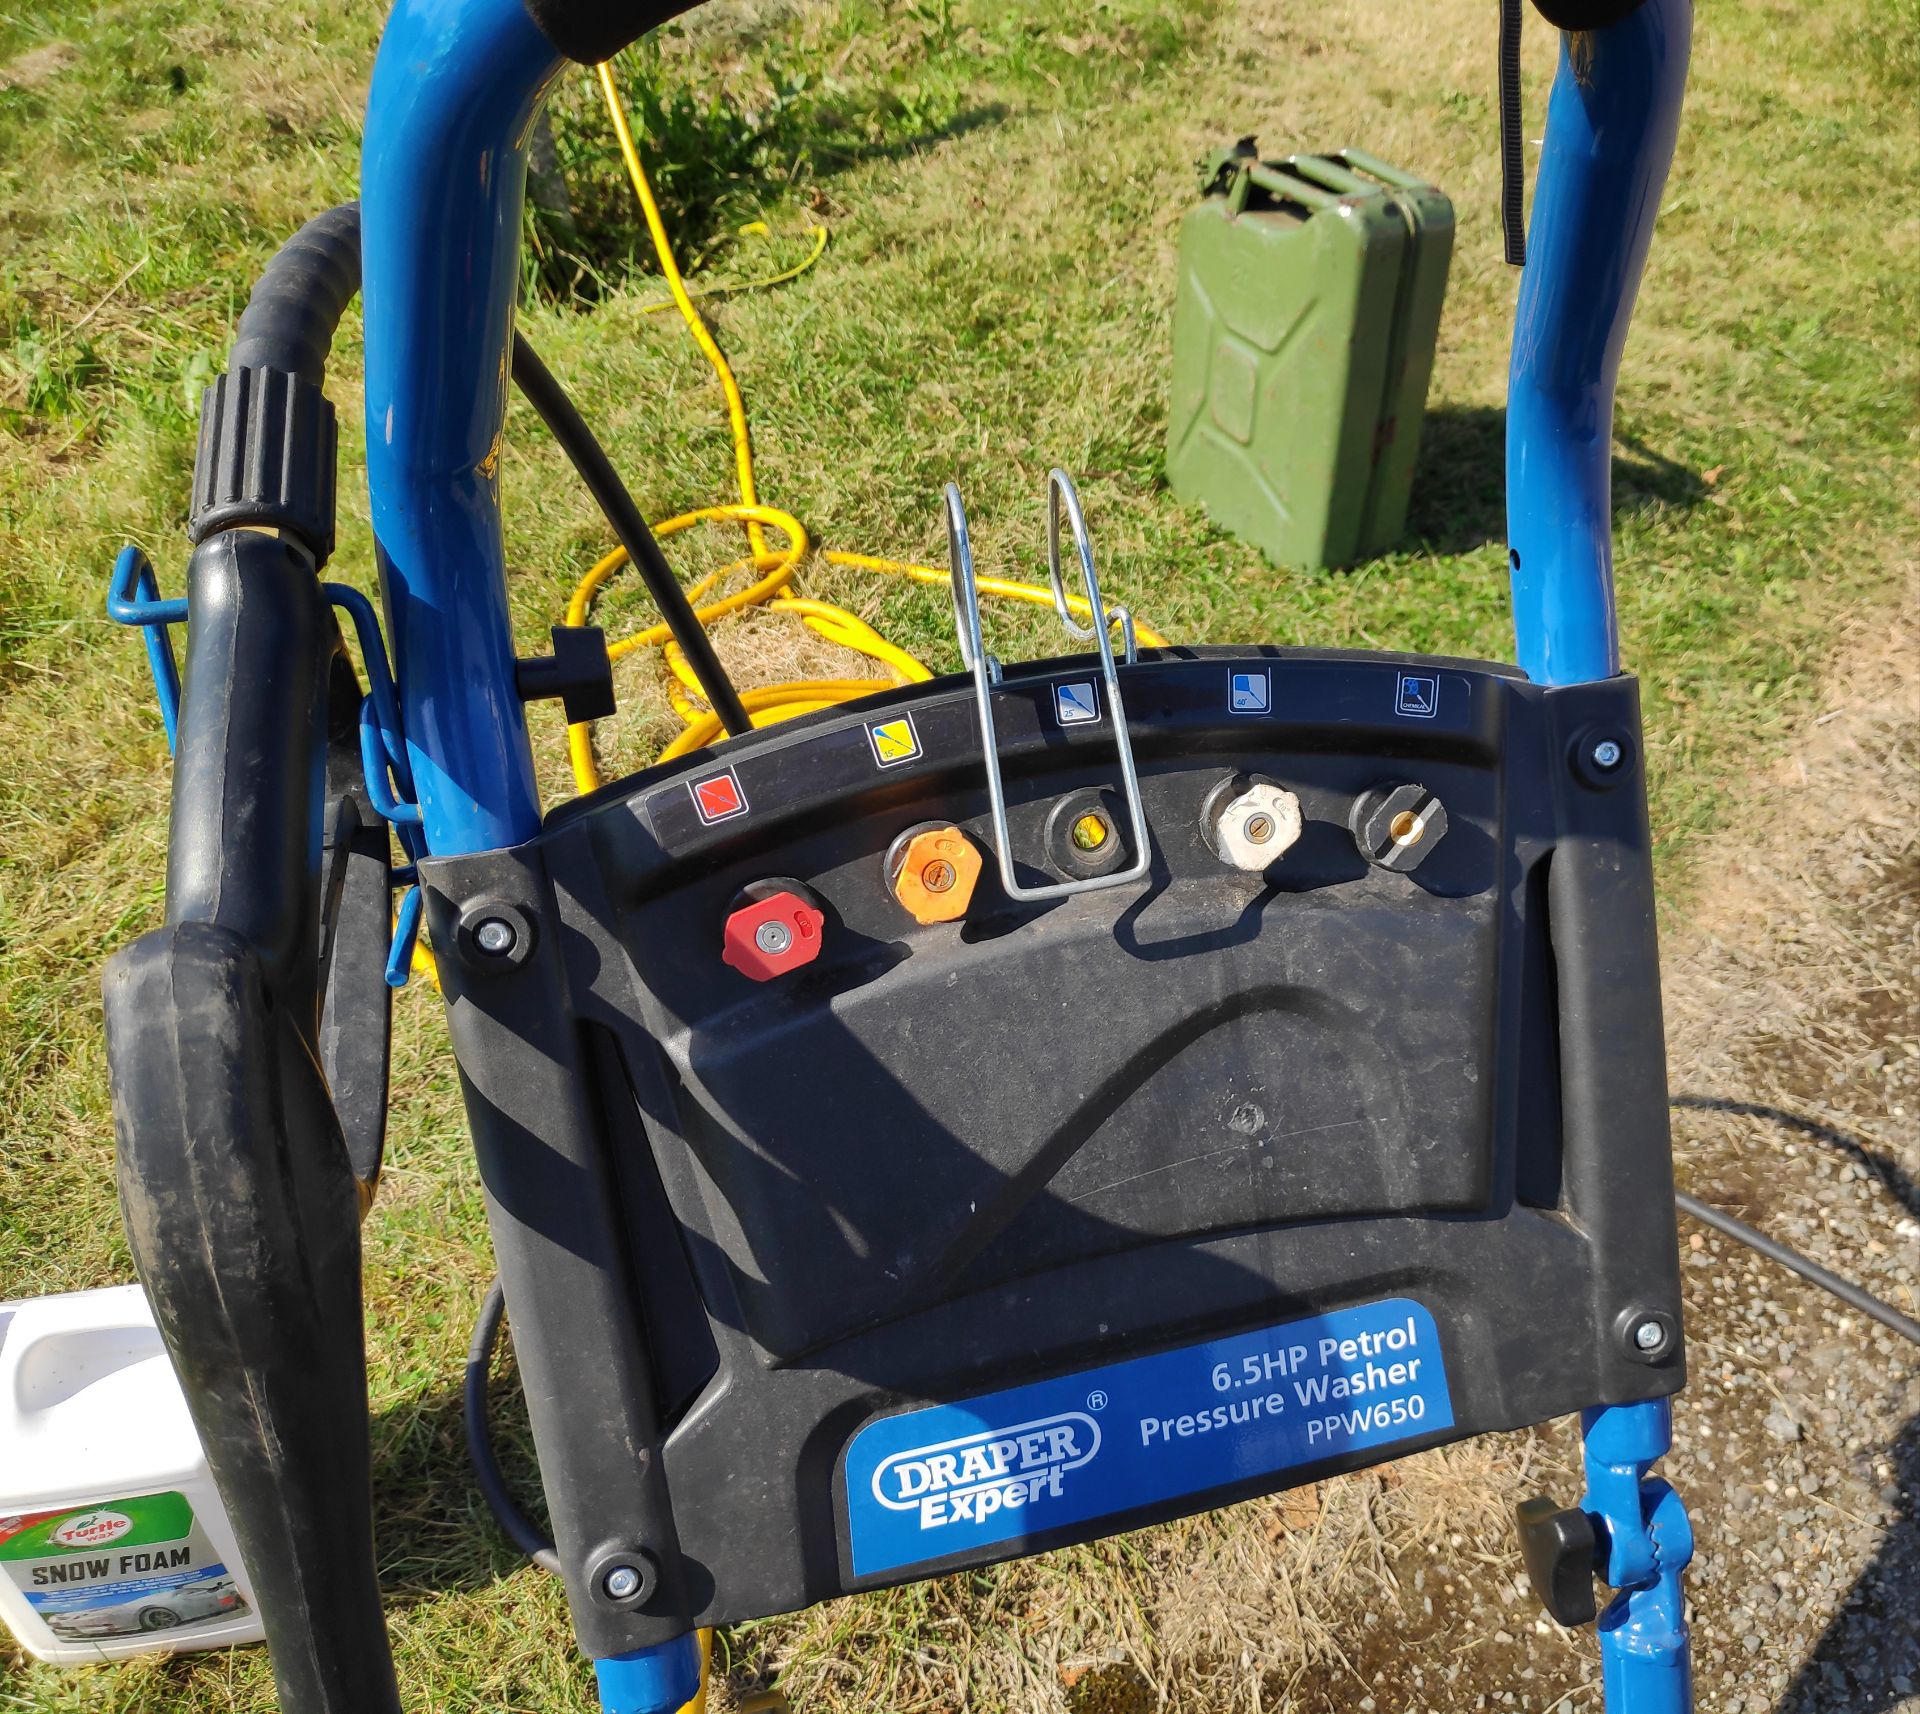 1 x Draper Expert 6.5Hp Petrol Pressure Washer PPW650 - CL011 - Location: Corby, Northamptonshire - Image 3 of 10